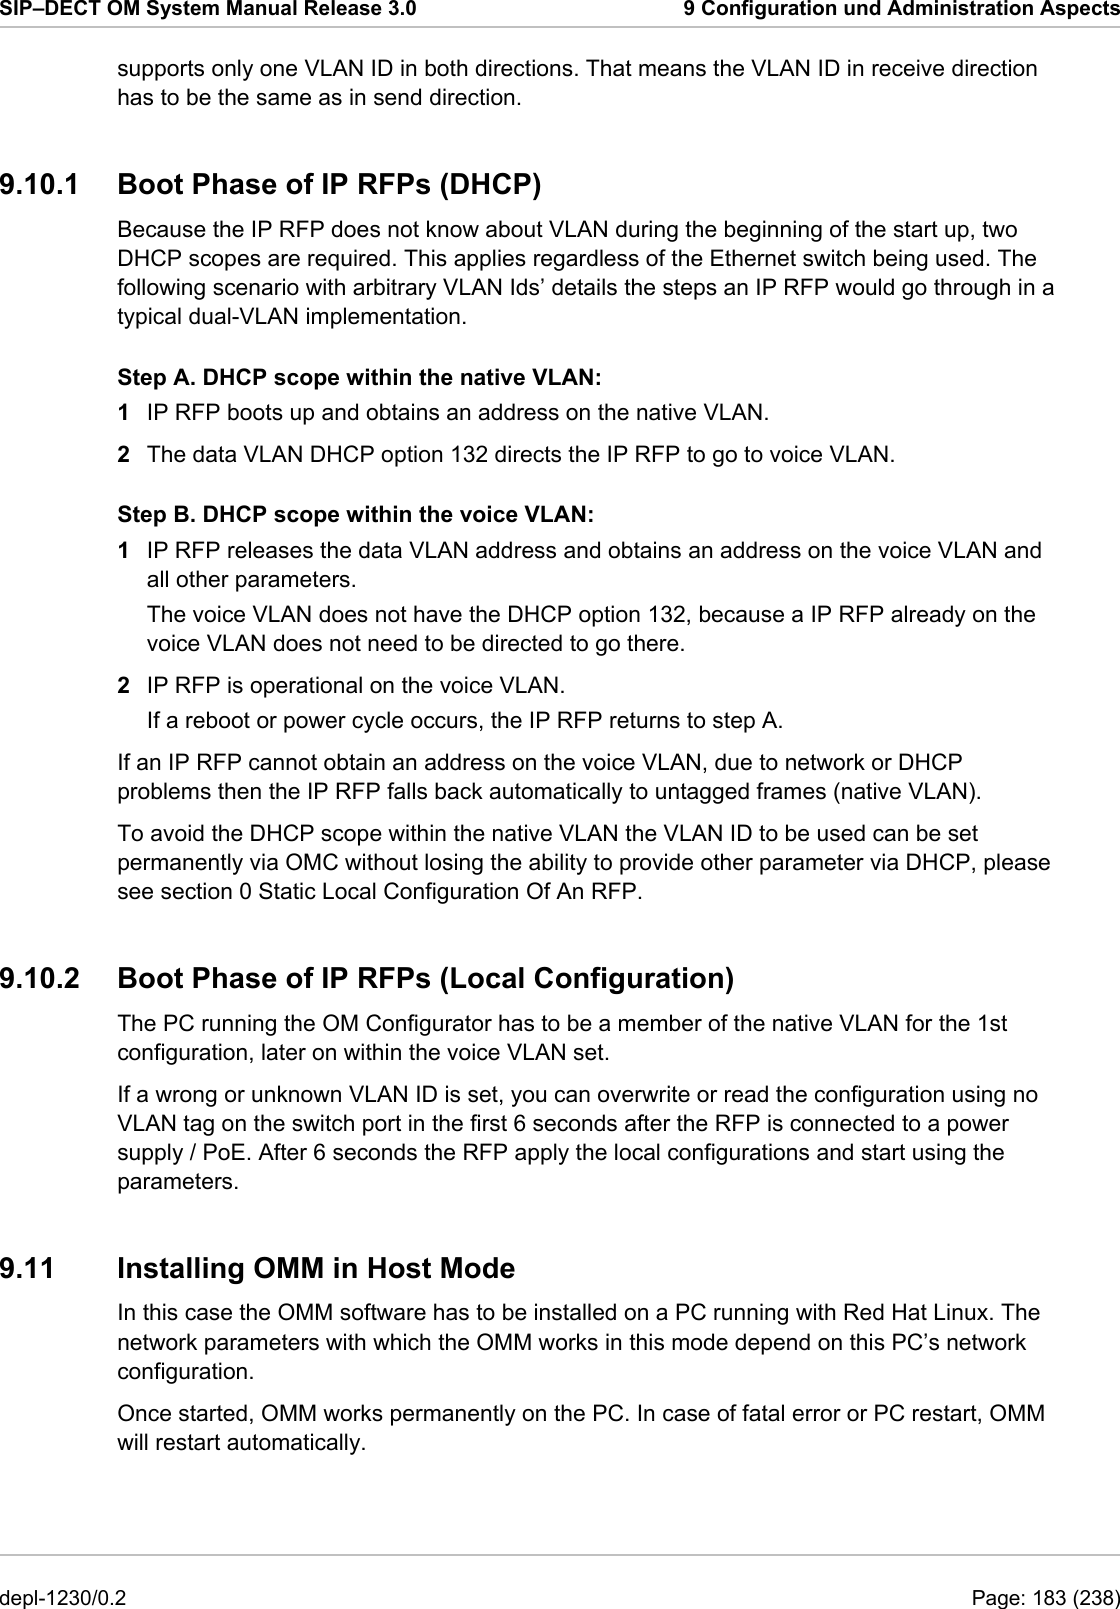 SIP–DECT OM System Manual Release 3.0  9 Configuration und Administration Aspects supports only one VLAN ID in both directions. That means the VLAN ID in receive direction has to be the same as in send direction. 9.10.1  Boot Phase of IP RFPs (DHCP) Because the IP RFP does not know about VLAN during the beginning of the start up, two DHCP scopes are required. This applies regardless of the Ethernet switch being used. The following scenario with arbitrary VLAN Ids’ details the steps an IP RFP would go through in a typical dual-VLAN implementation. Step A. DHCP scope within the native VLAN: 1  IP RFP boots up and obtains an address on the native VLAN. 2  The data VLAN DHCP option 132 directs the IP RFP to go to voice VLAN. Step B. DHCP scope within the voice VLAN: 1  IP RFP releases the data VLAN address and obtains an address on the voice VLAN and all other parameters. The voice VLAN does not have the DHCP option 132, because a IP RFP already on the voice VLAN does not need to be directed to go there. 2  IP RFP is operational on the voice VLAN. If a reboot or power cycle occurs, the IP RFP returns to step A. If an IP RFP cannot obtain an address on the voice VLAN, due to network or DHCP problems then the IP RFP falls back automatically to untagged frames (native VLAN). To avoid the DHCP scope within the native VLAN the VLAN ID to be used can be set permanently via OMC without losing the ability to provide other parameter via DHCP, please see section 0 Static Local Configuration Of An RFP. 9.10.2  Boot Phase of IP RFPs (Local Configuration) The PC running the OM Configurator has to be a member of the native VLAN for the 1st configuration, later on within the voice VLAN set. If a wrong or unknown VLAN ID is set, you can overwrite or read the configuration using no VLAN tag on the switch port in the first 6 seconds after the RFP is connected to a power supply / PoE. After 6 seconds the RFP apply the local configurations and start using the parameters. 9.11  Installing OMM in Host Mode In this case the OMM software has to be installed on a PC running with Red Hat Linux. The network parameters with which the OMM works in this mode depend on this PC’s network configuration. Once started, OMM works permanently on the PC. In case of fatal error or PC restart, OMM will restart automatically.  depl-1230/0.2  Page: 183 (238) 